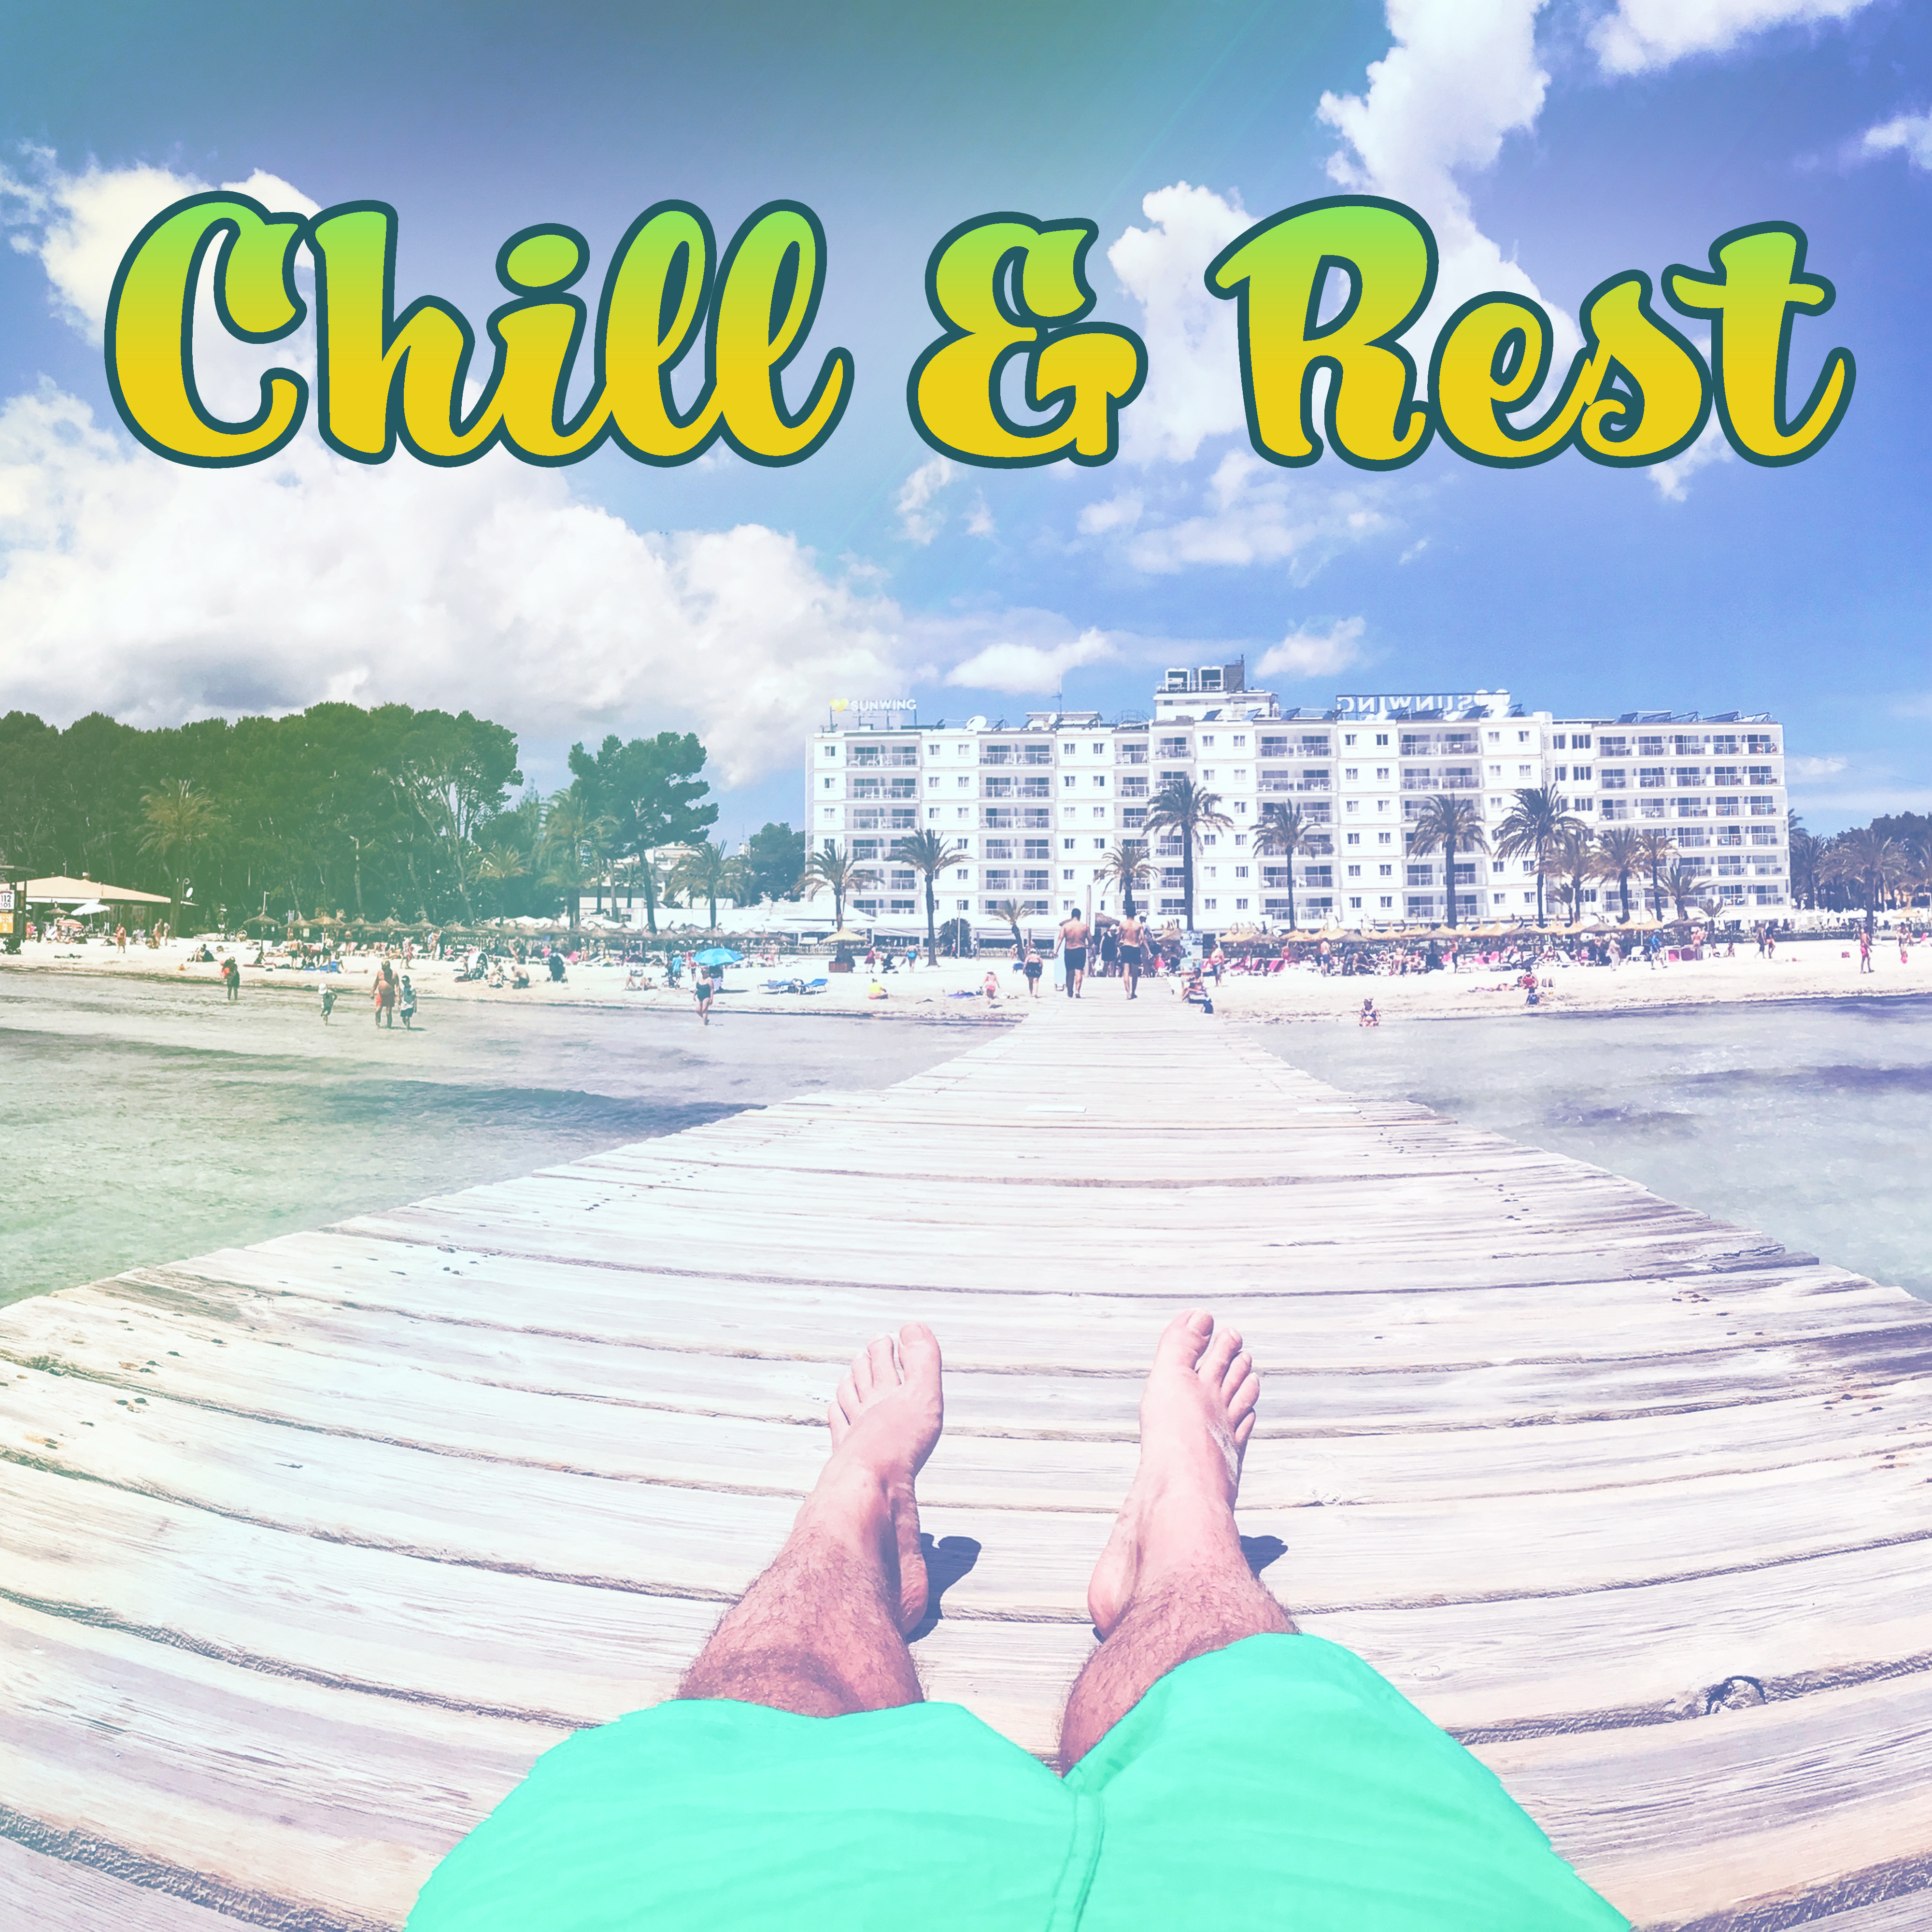 Chill & Rest – Peaceful Music to Calm Down, Stress Relief, Summer Sounds, Beach Chill, Summertime, Relaxation